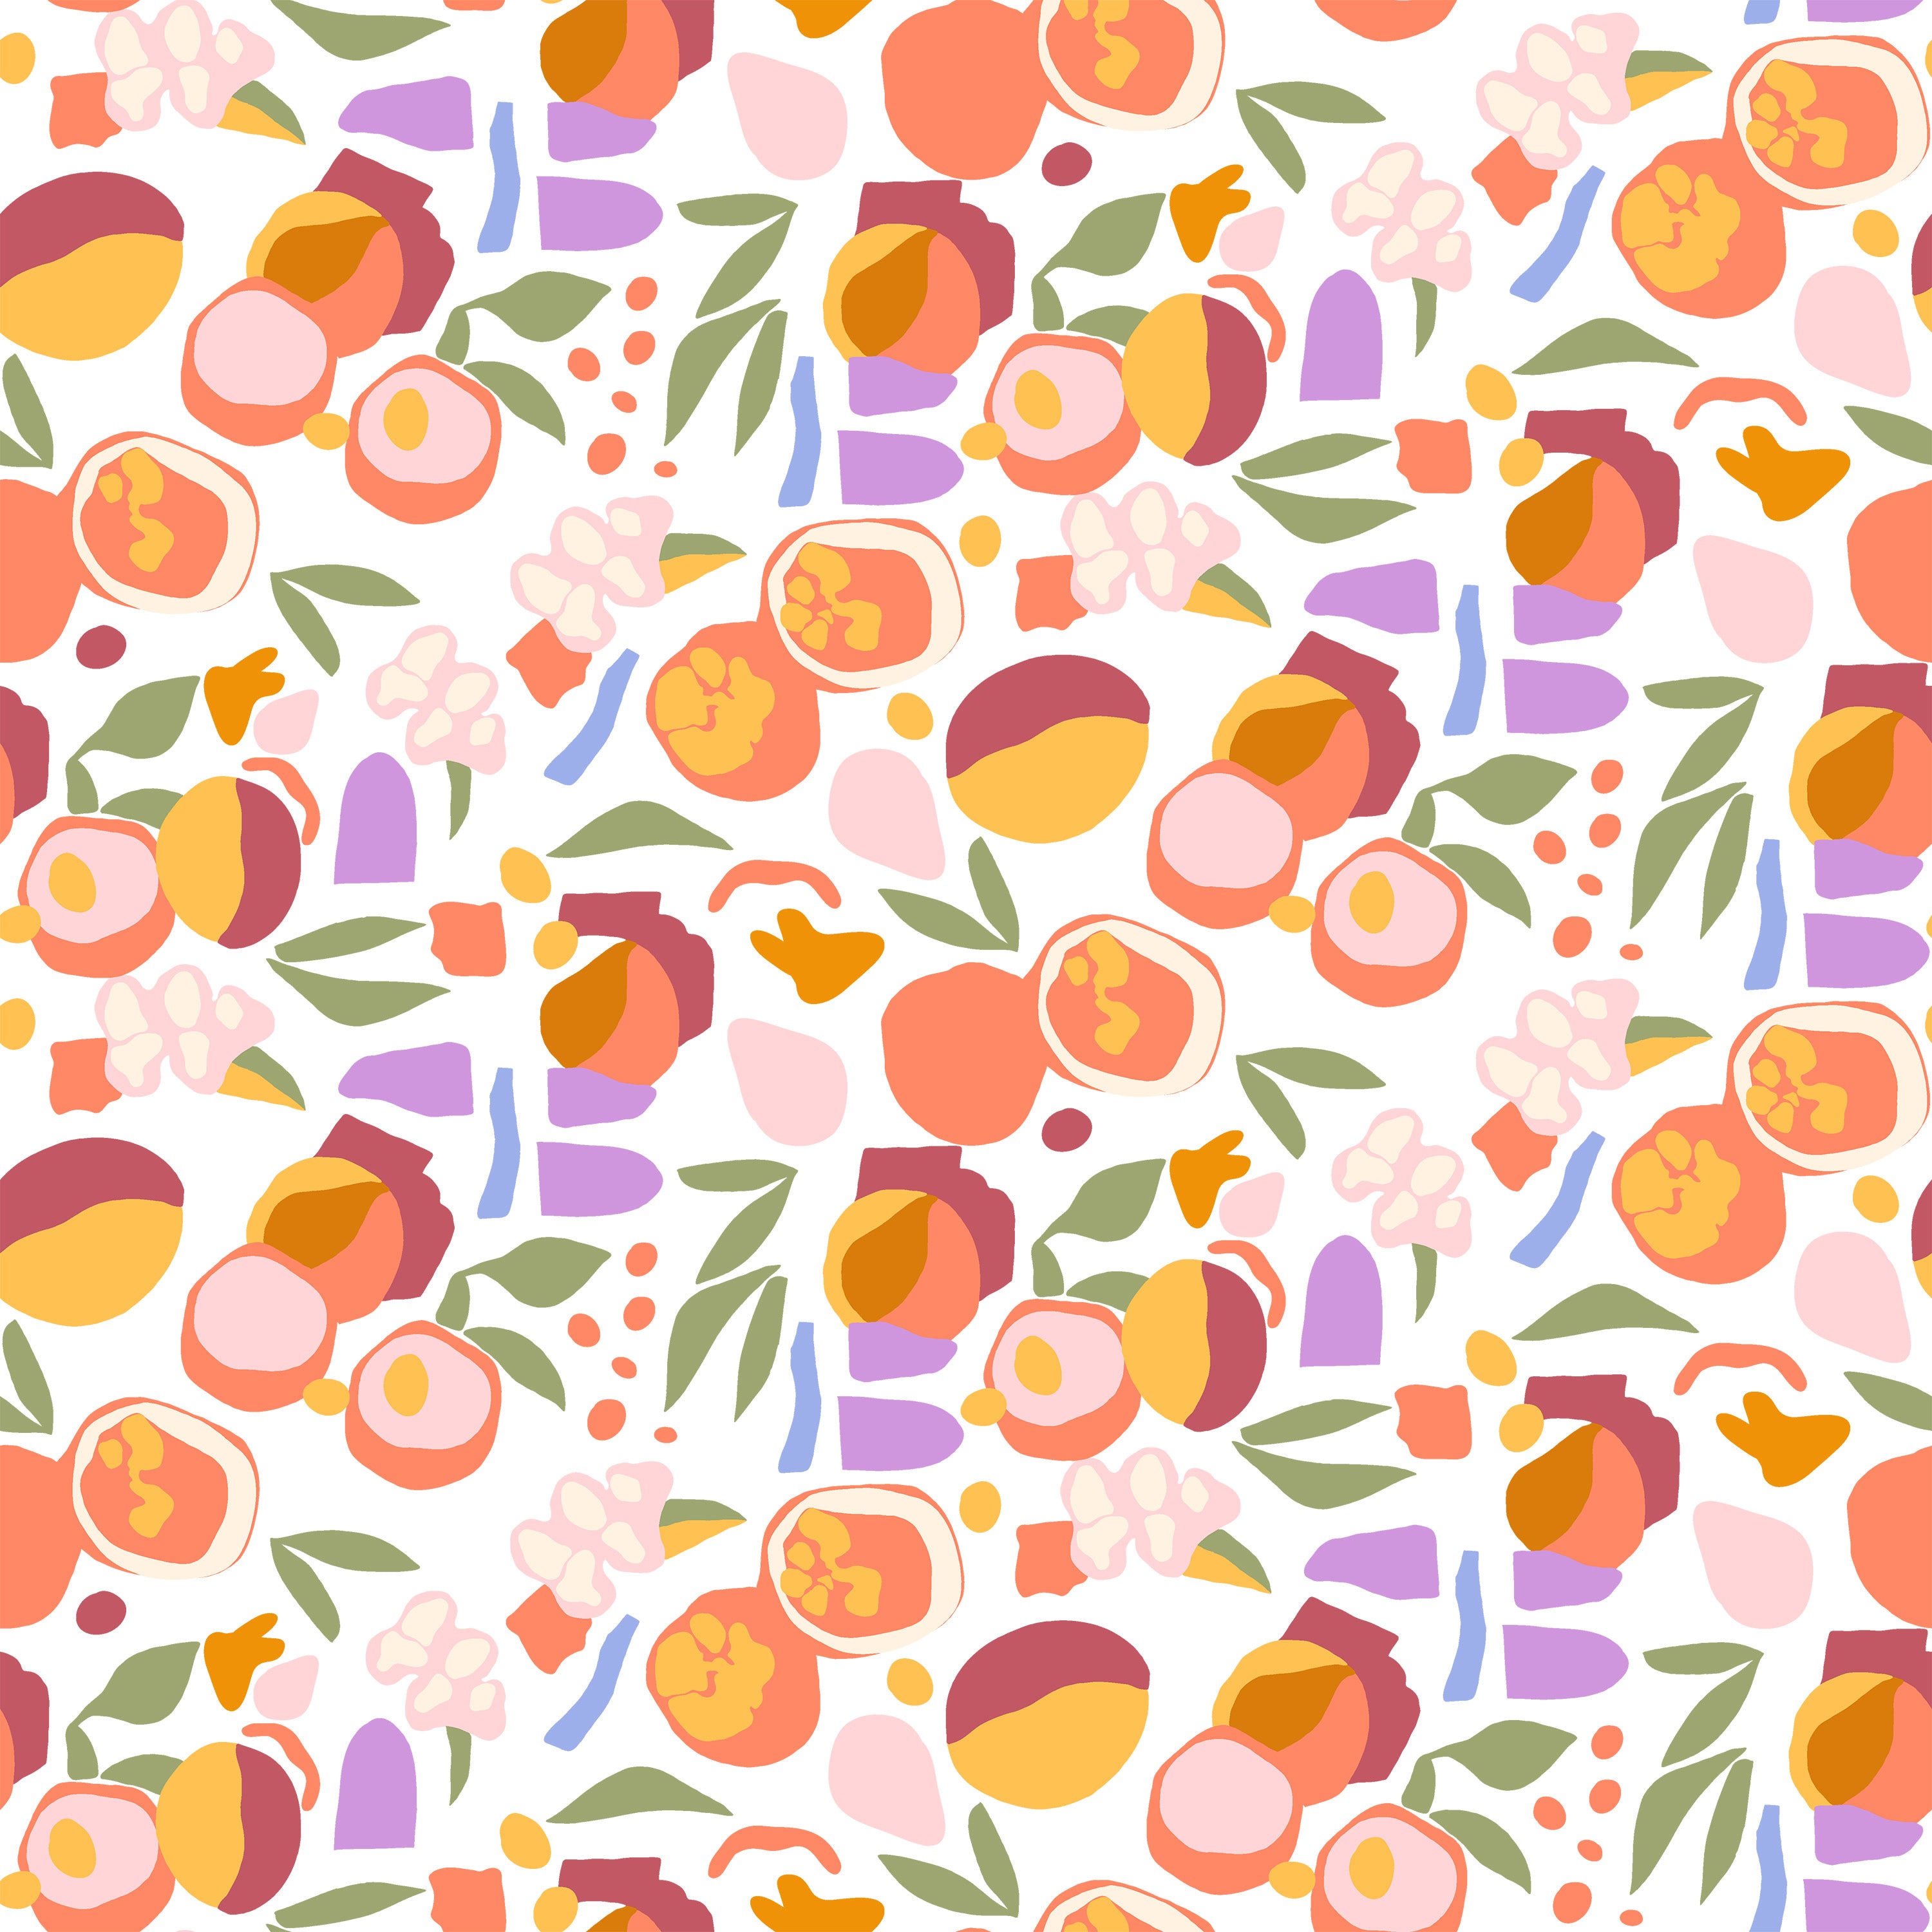 A detailed view of the Funky Fruit Wallpaper featuring a colorful pattern of oranges, peaches, and leaves on a soft violet background. The design includes bold, vibrant colors with a playful and whimsical feel, ideal for adding a cheerful touch to any room.